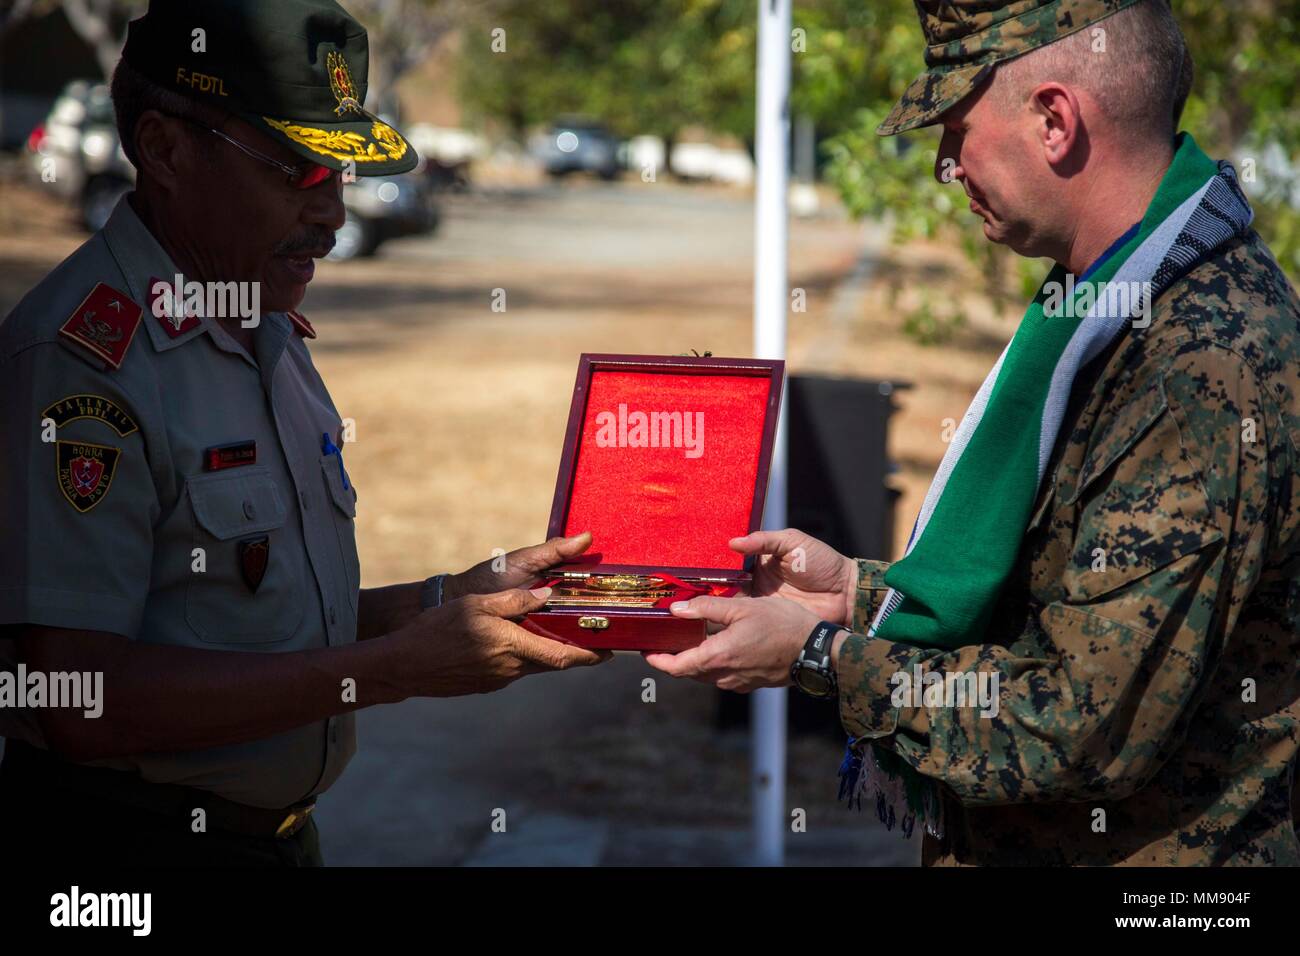 U.S. Marine Corps Maj. Brian Hollier, right, task force commander for Task Force Koa Moana 17, receives a plaque during a closing ceremony for Exercise Crocodilo in Metinaro, Timor Leste, Sept. 14, 2017. Koa Moana 17 is designed to improve interoperability with our partners, enhance military-to-military relations, and expose the Marine Corps forces to different types of terrain for familiarity in the event of a natural disaster in the region.  (U.S. Marine Corps photo by MCIPAC Combat Camera Lance Cpl. Juan C. Bustos) Stock Photo